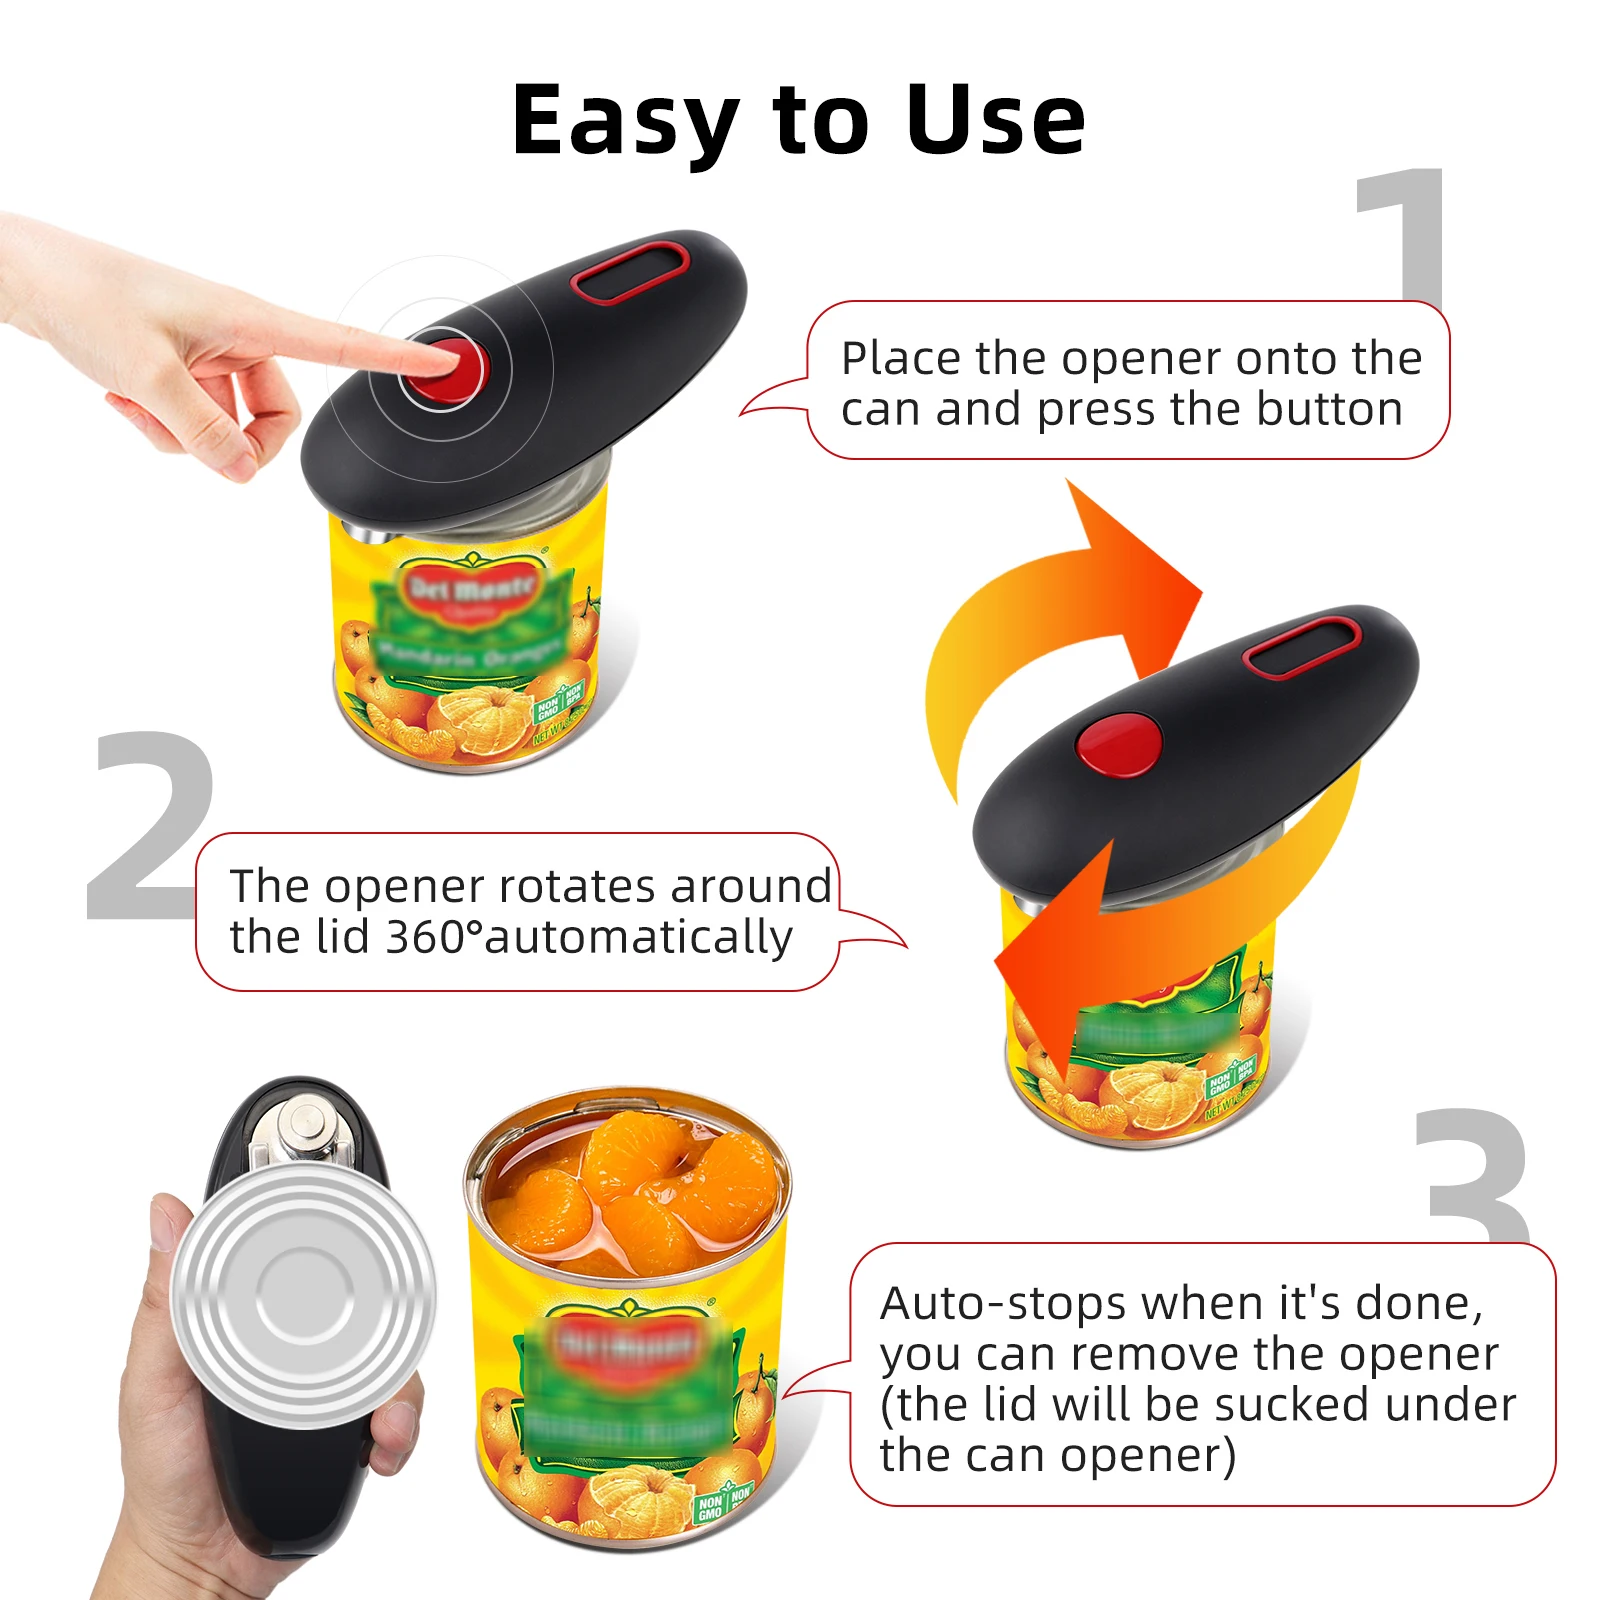 https://ae01.alicdn.com/kf/S4cfd2ab874ff4c61b7137171f3c5809ew/Electric-Can-Opener-Automatic-Bottle-Opener-Cordless-One-Tin-Touch-No-Sharp-Edges-Handheld-Jar-Openers.jpg